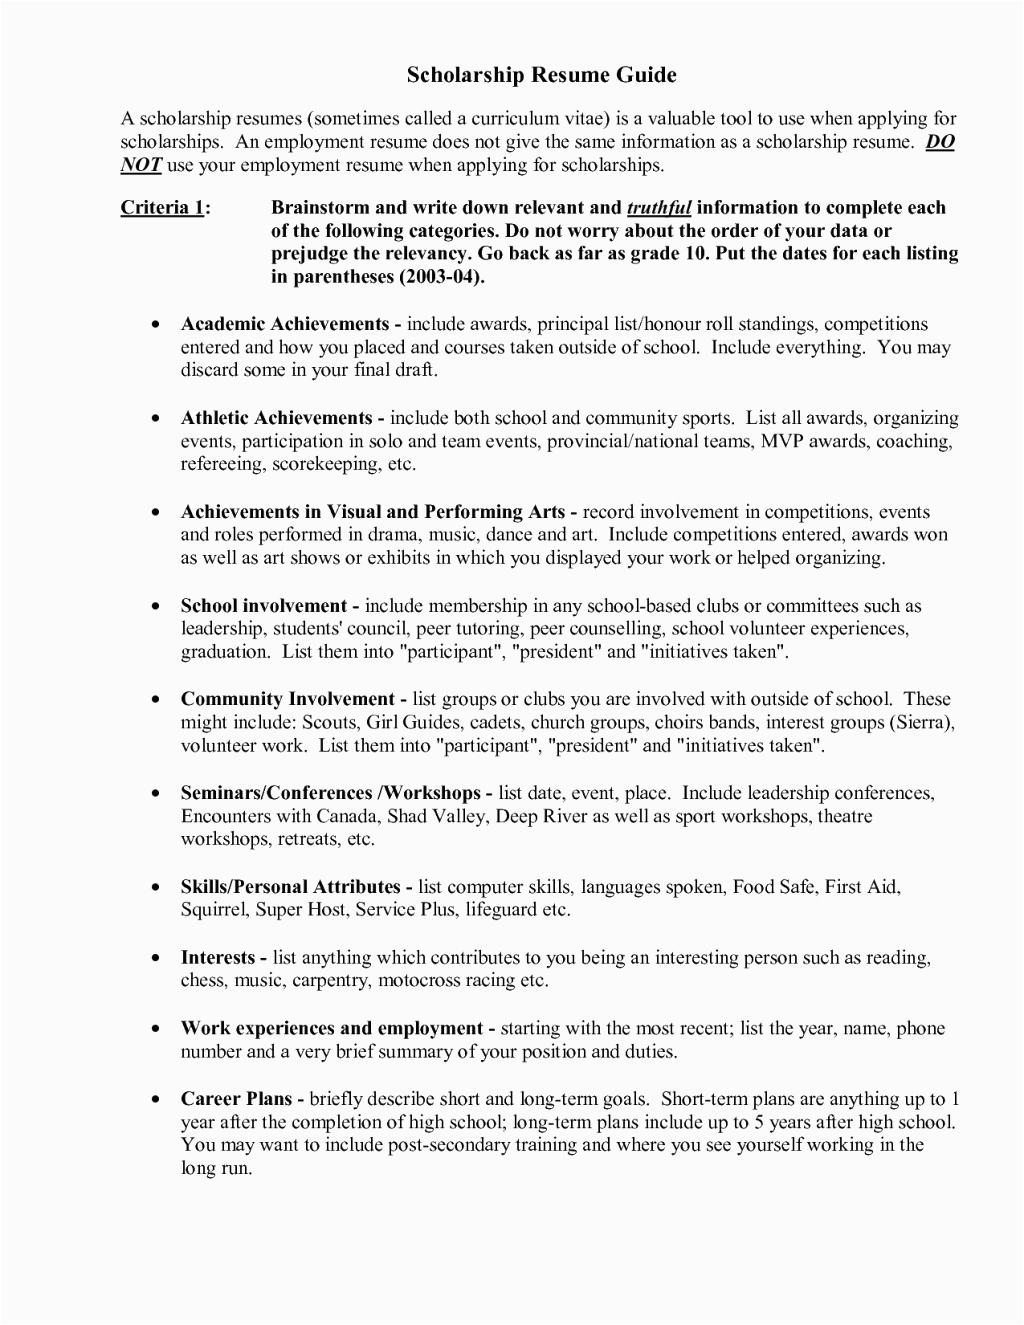 Resume Sample for A Long Term Employee 12 13 Long Term Employment Resume Examples